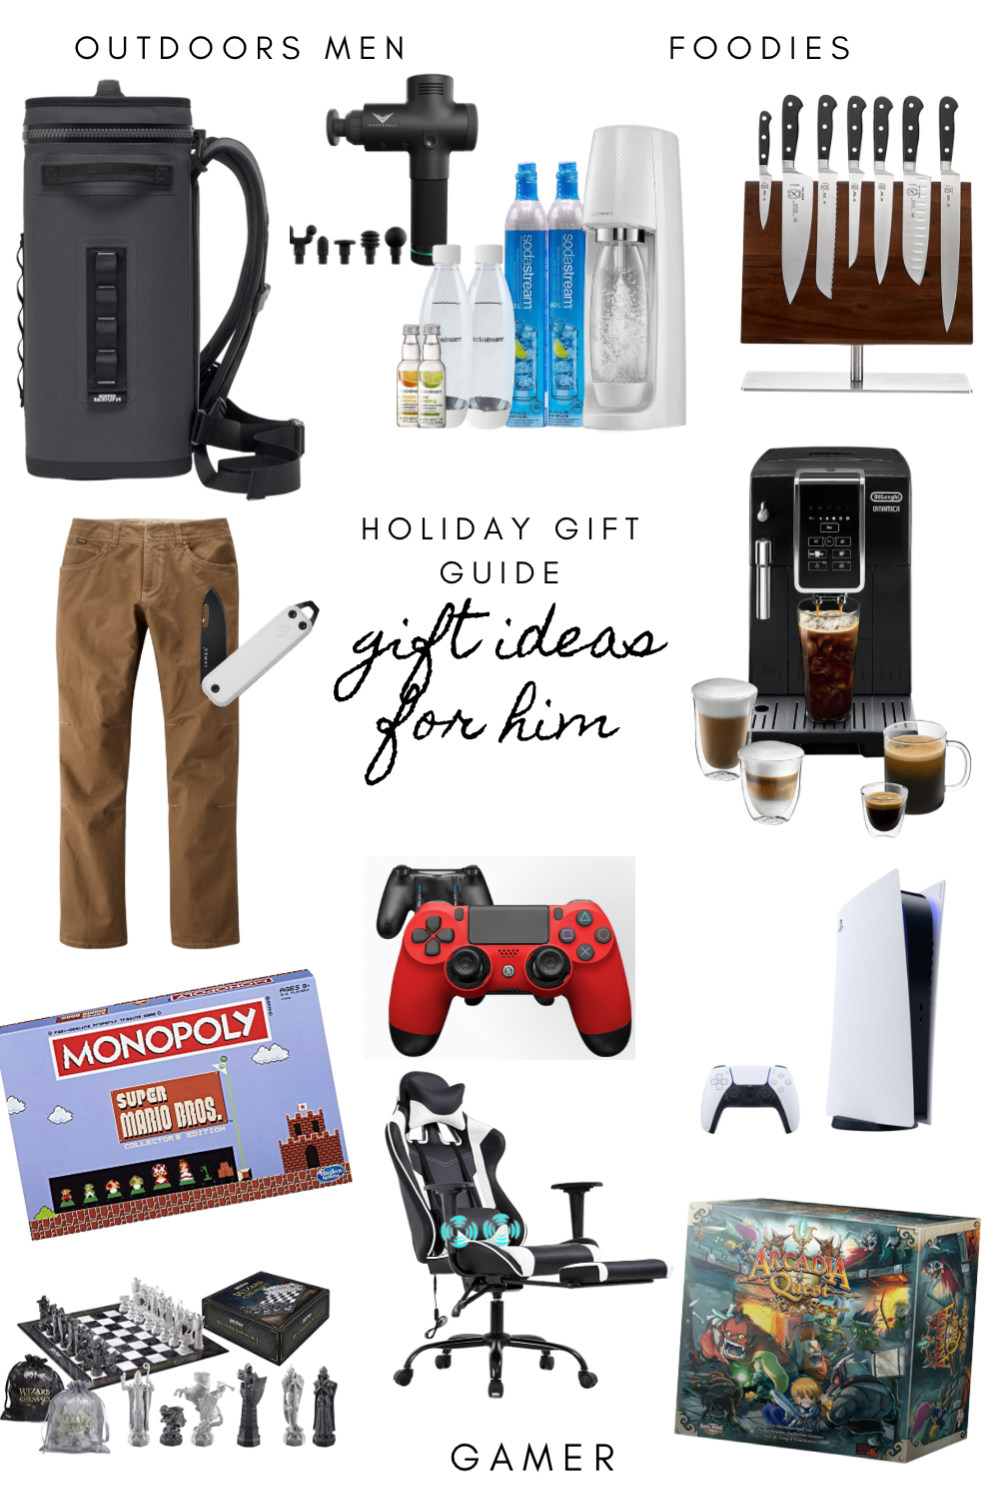 Holiday gift ideas for the guys in your life